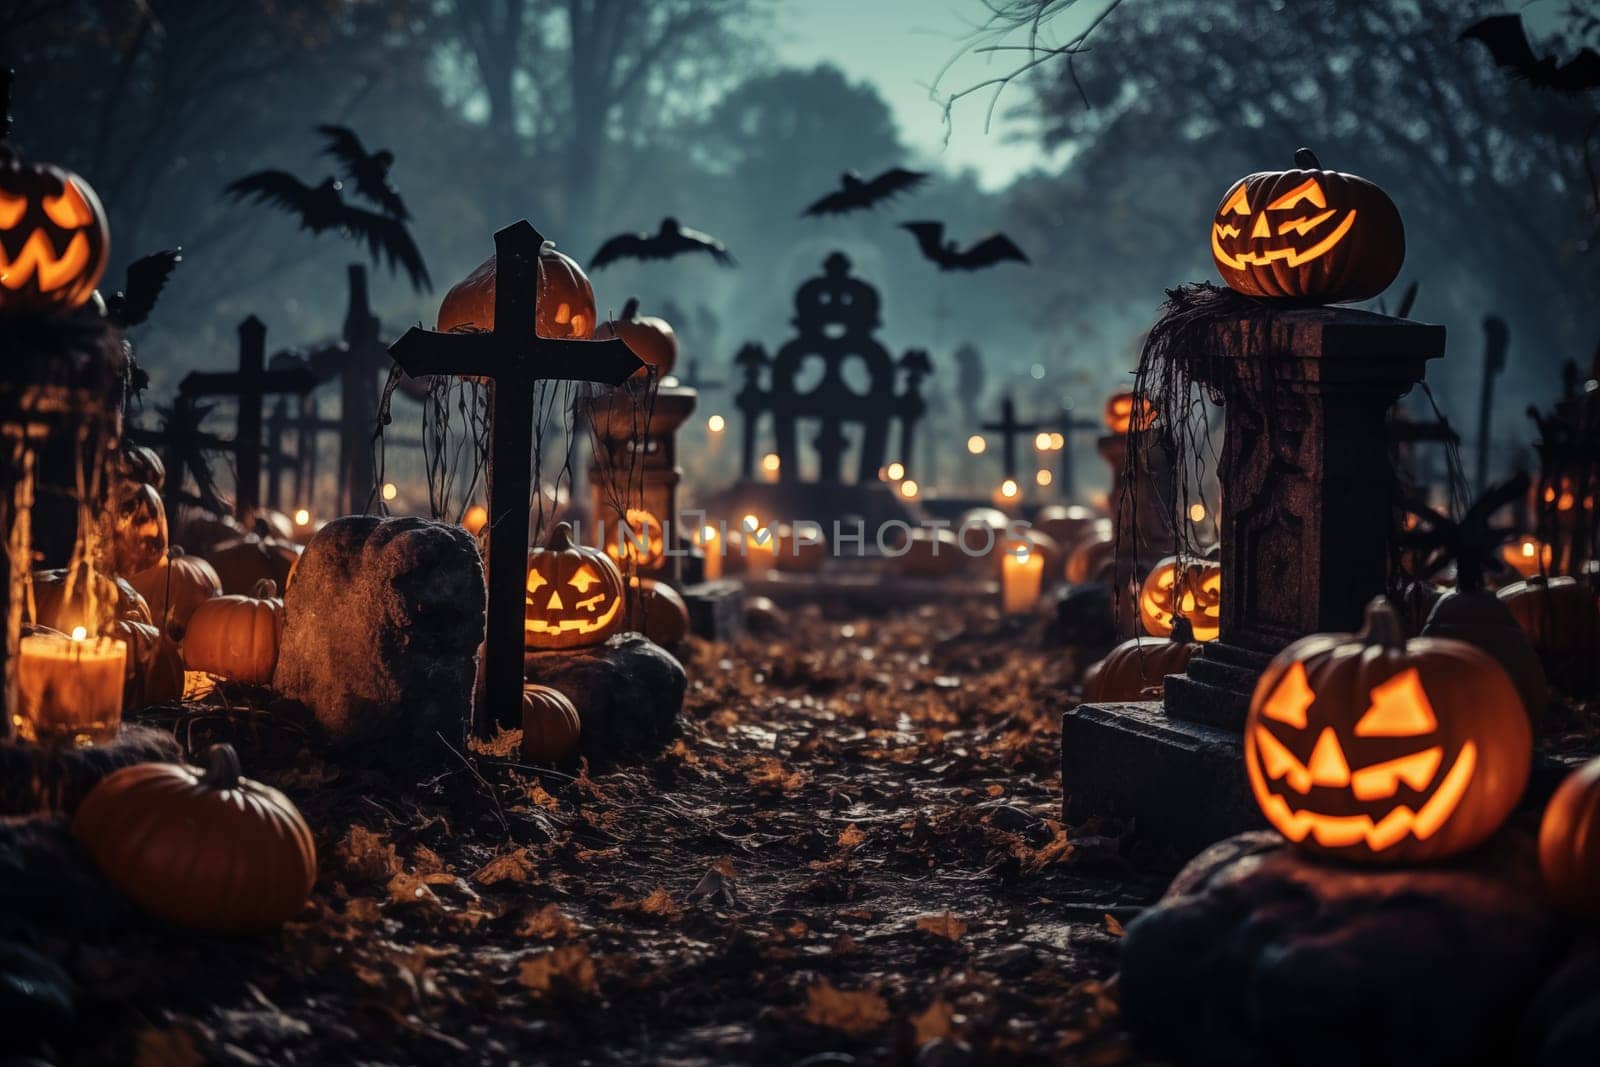 Halloween graveyard at night with pumpkins with glowing eyes, graves and tombstones by dimol